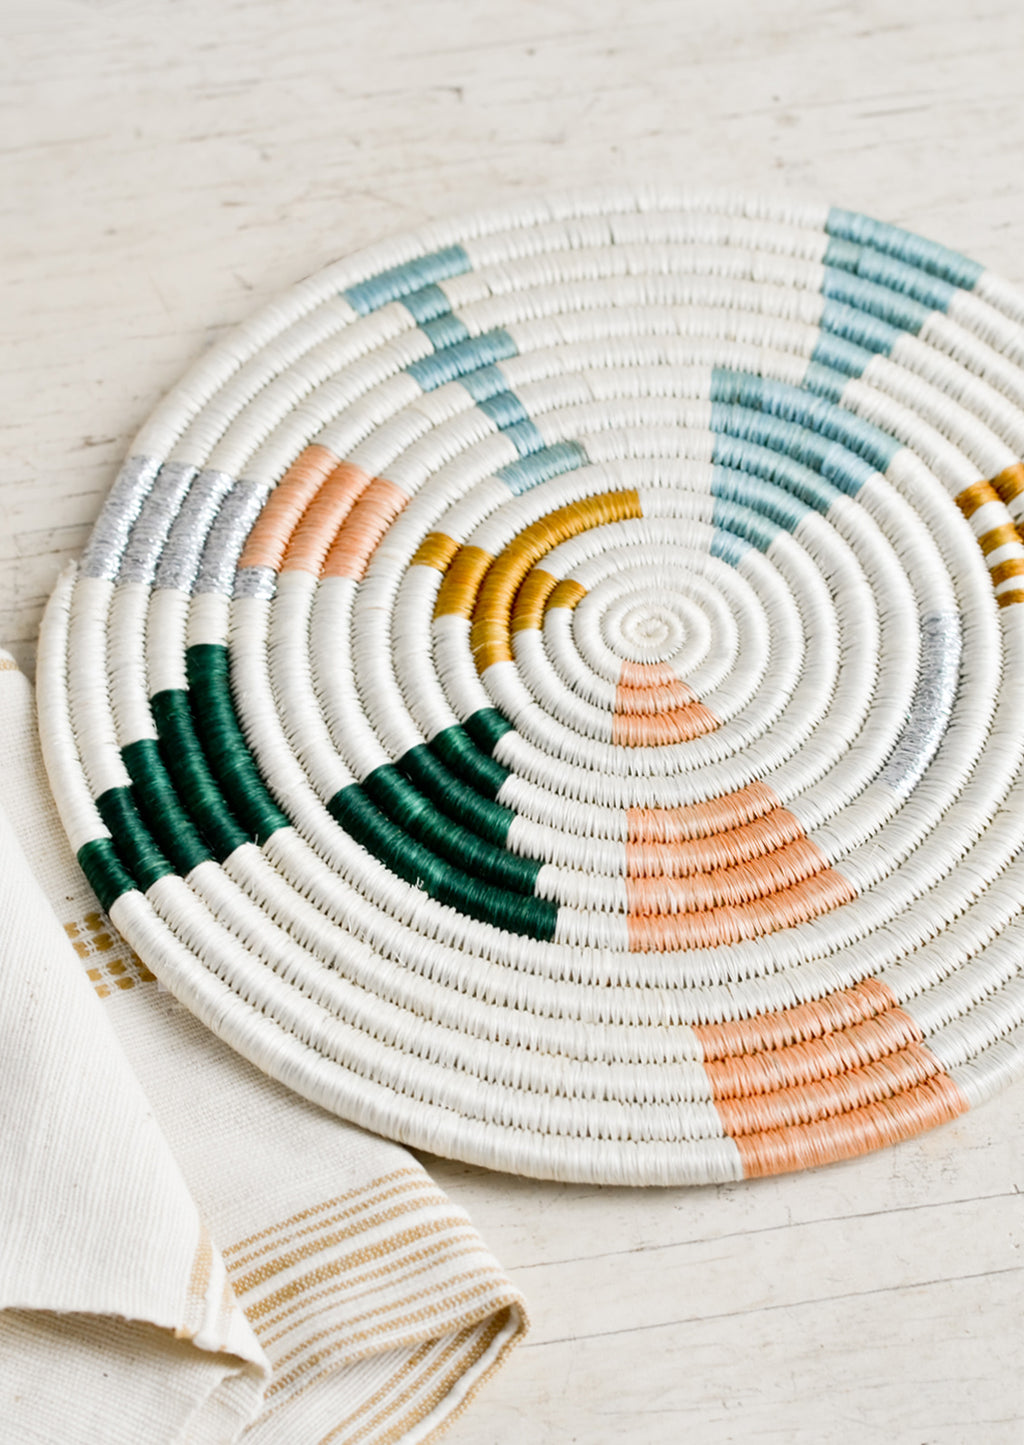 3: A round trivet in white with metallic and pastel design.